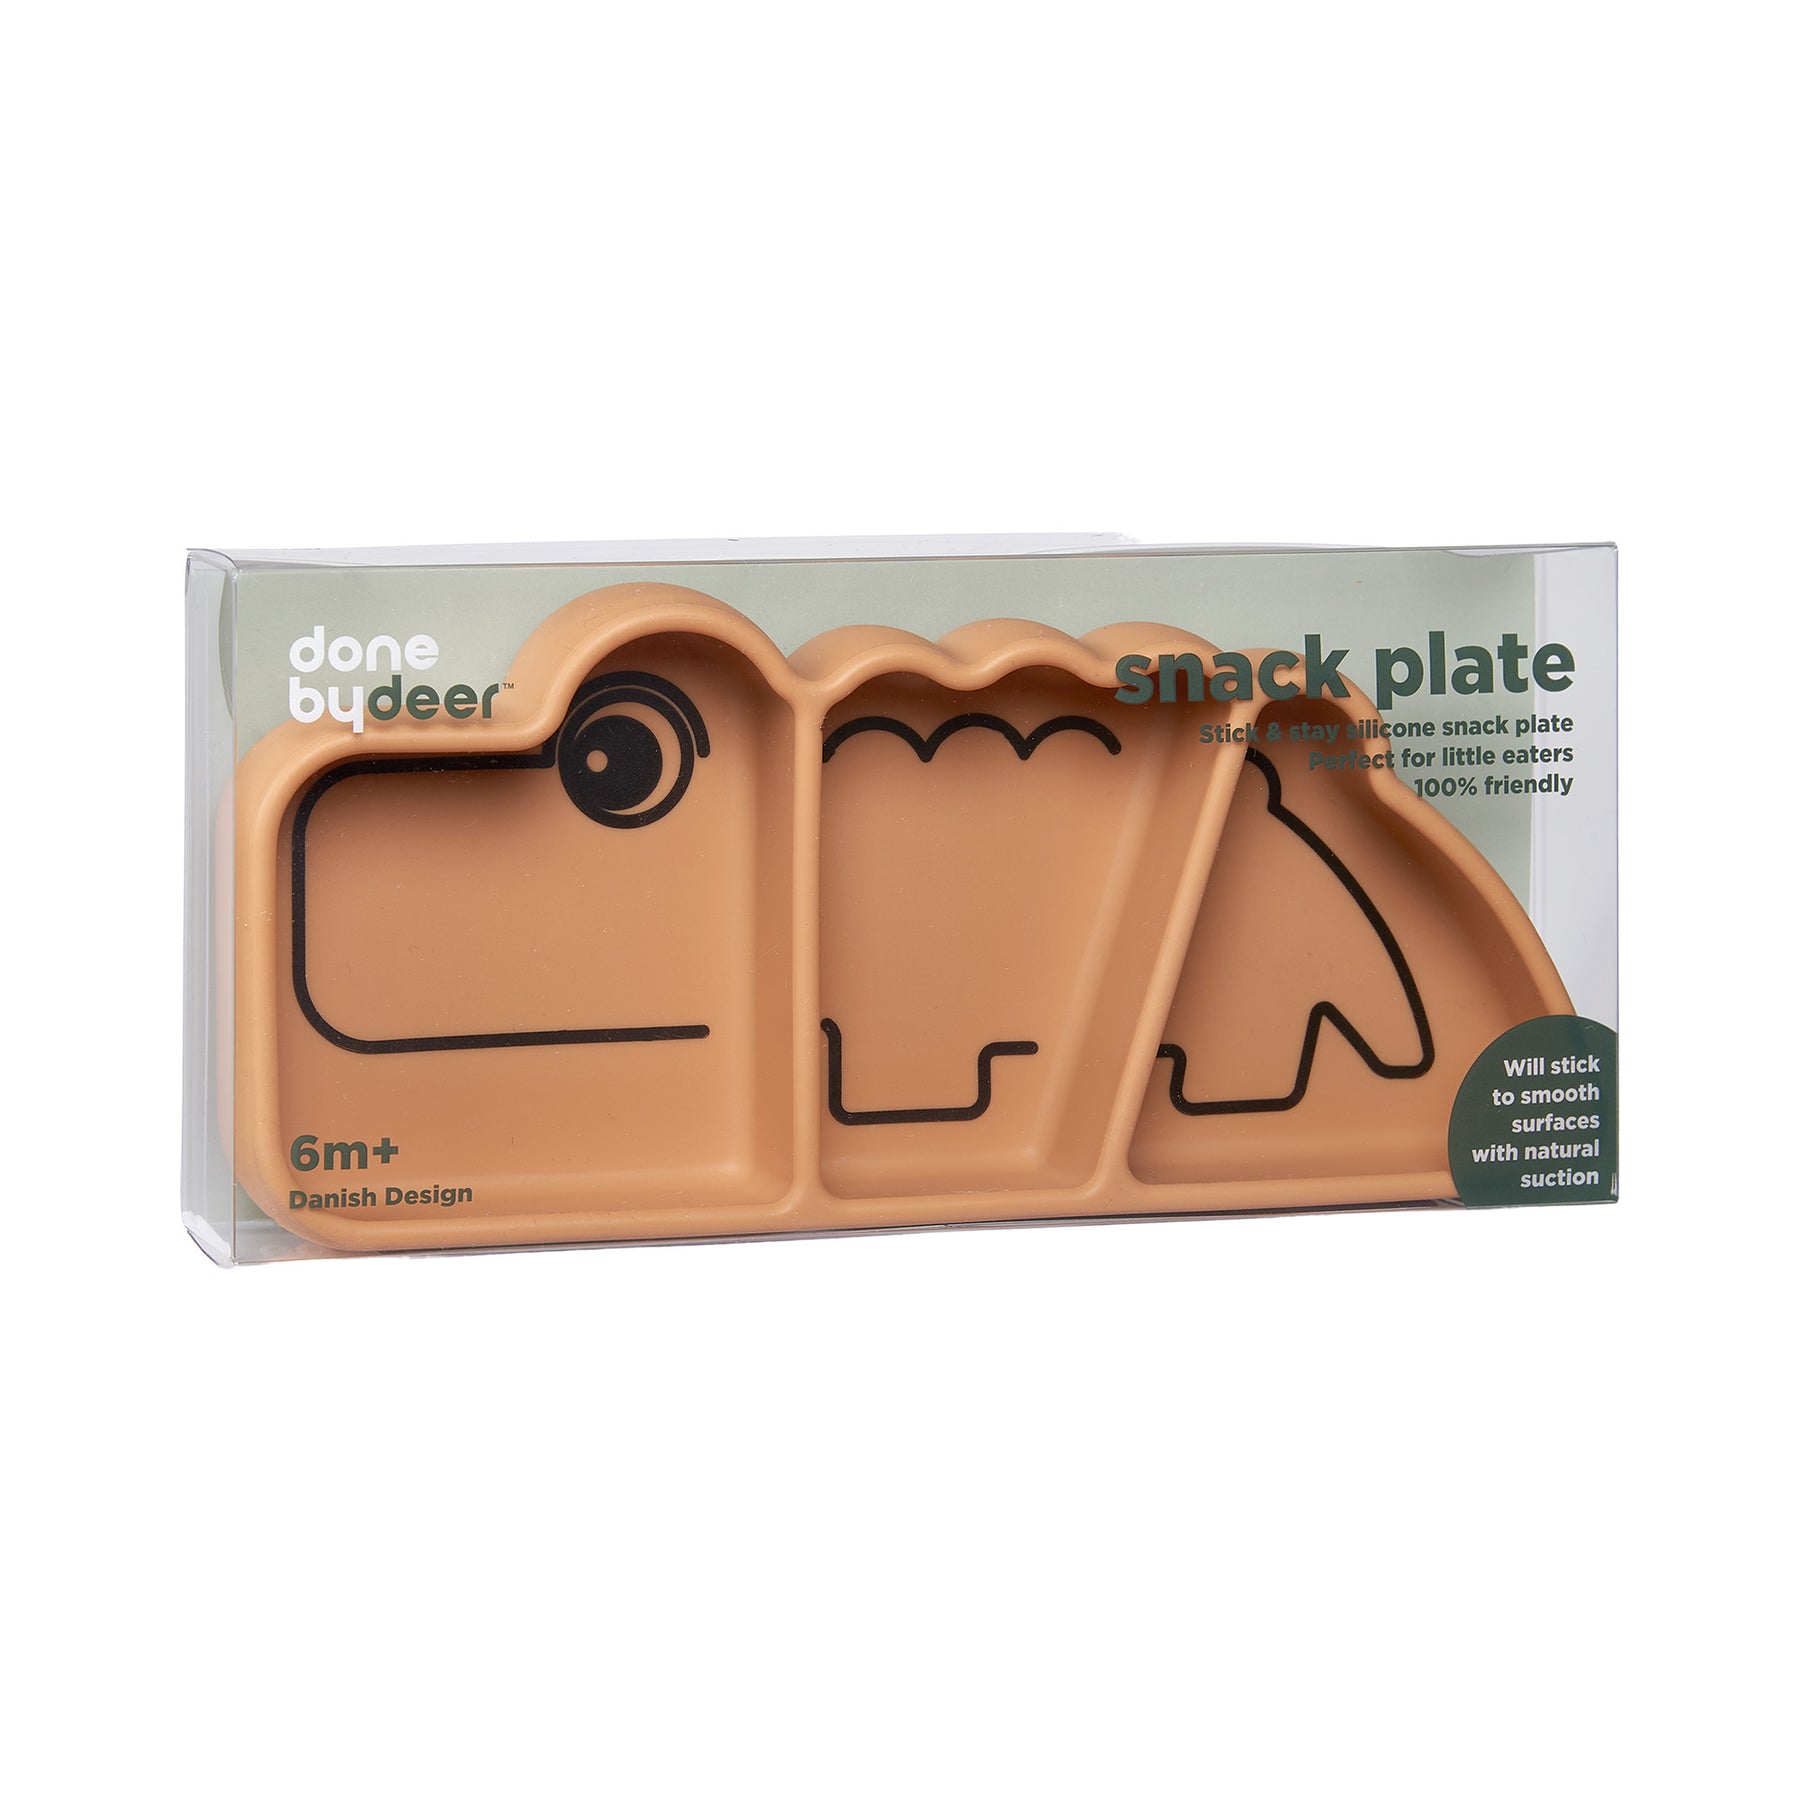 Silicone Stick & Stay snackplate - Croco - Mustard - Packaging